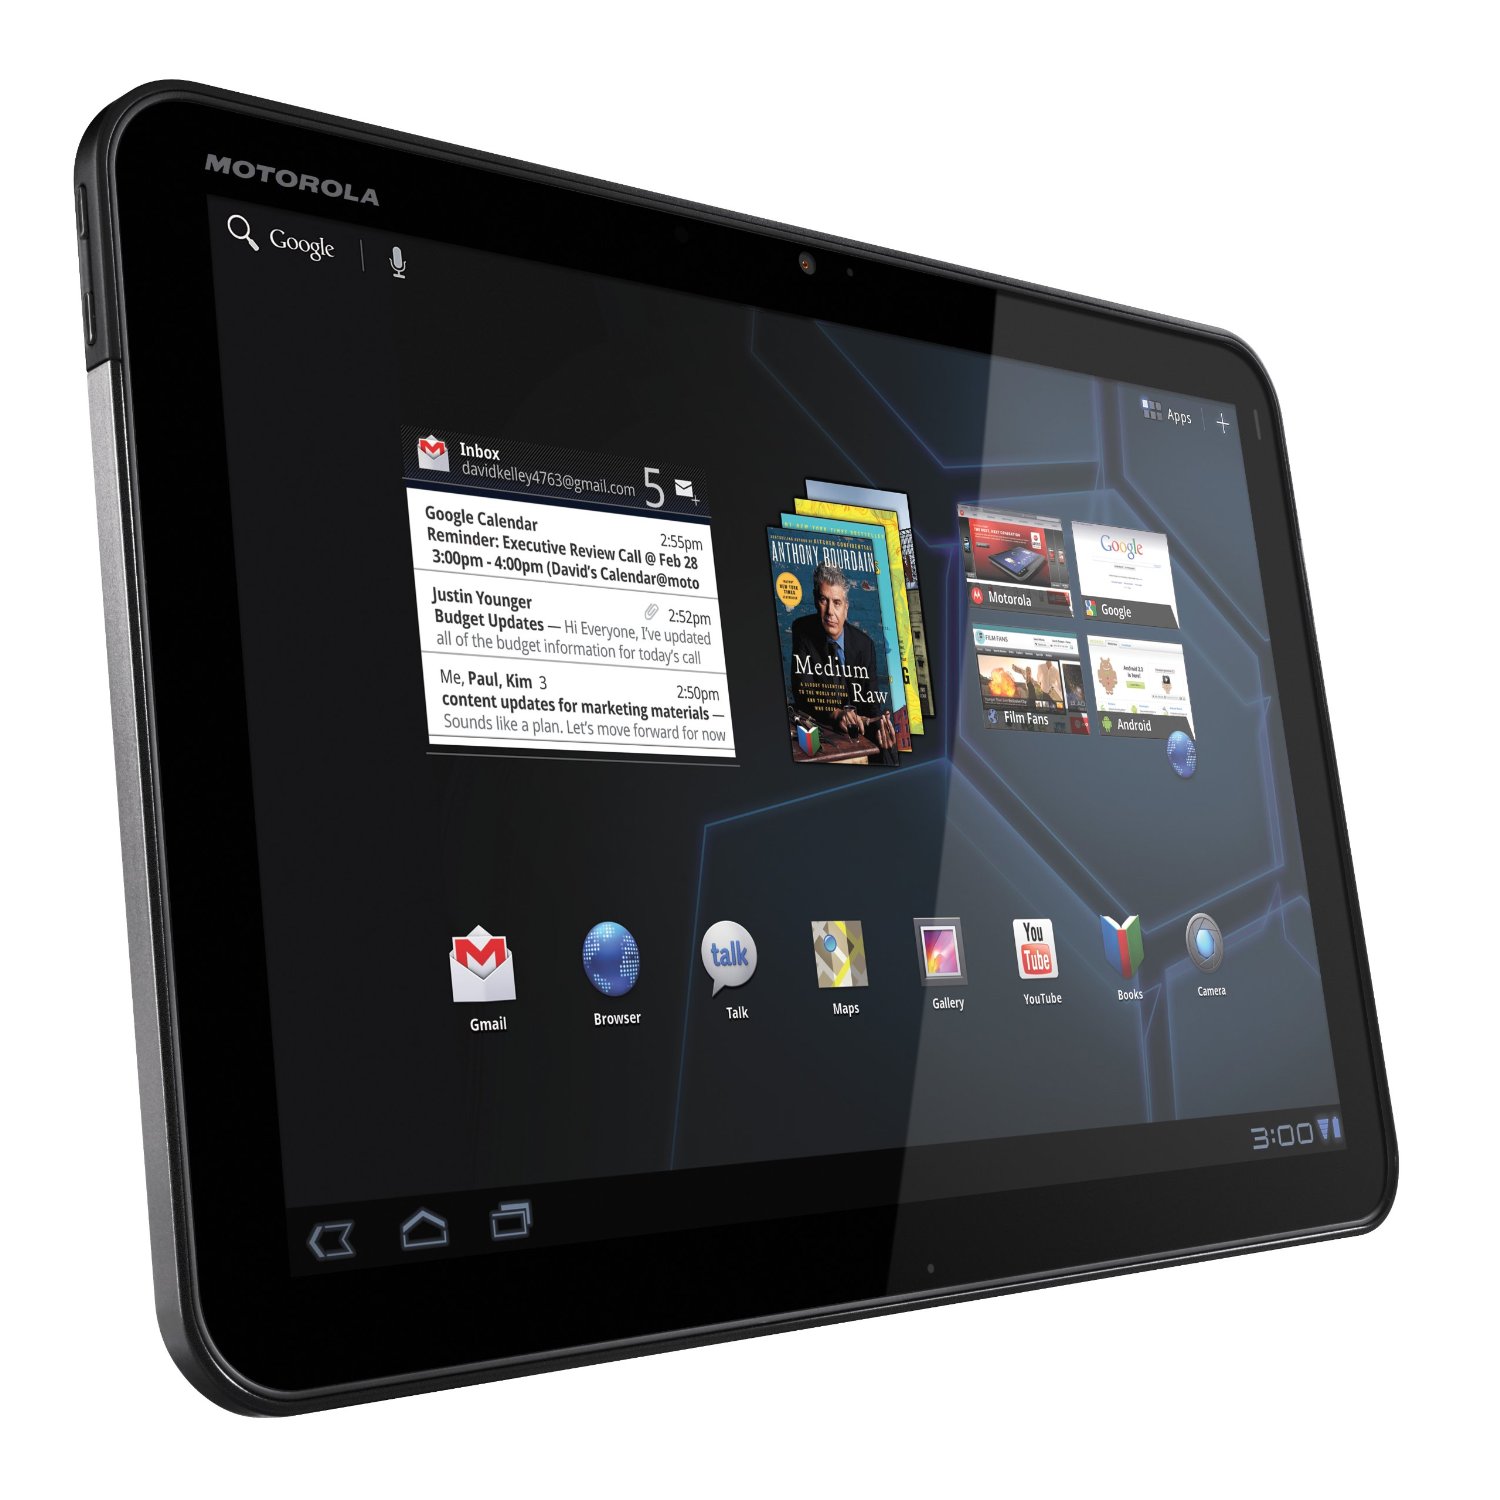 http://thetechjournal.com/wp-content/uploads/images/1109/1316934495-motorola-xoom-32-gb-101inch-with-wifi-android-tablet--5.jpg